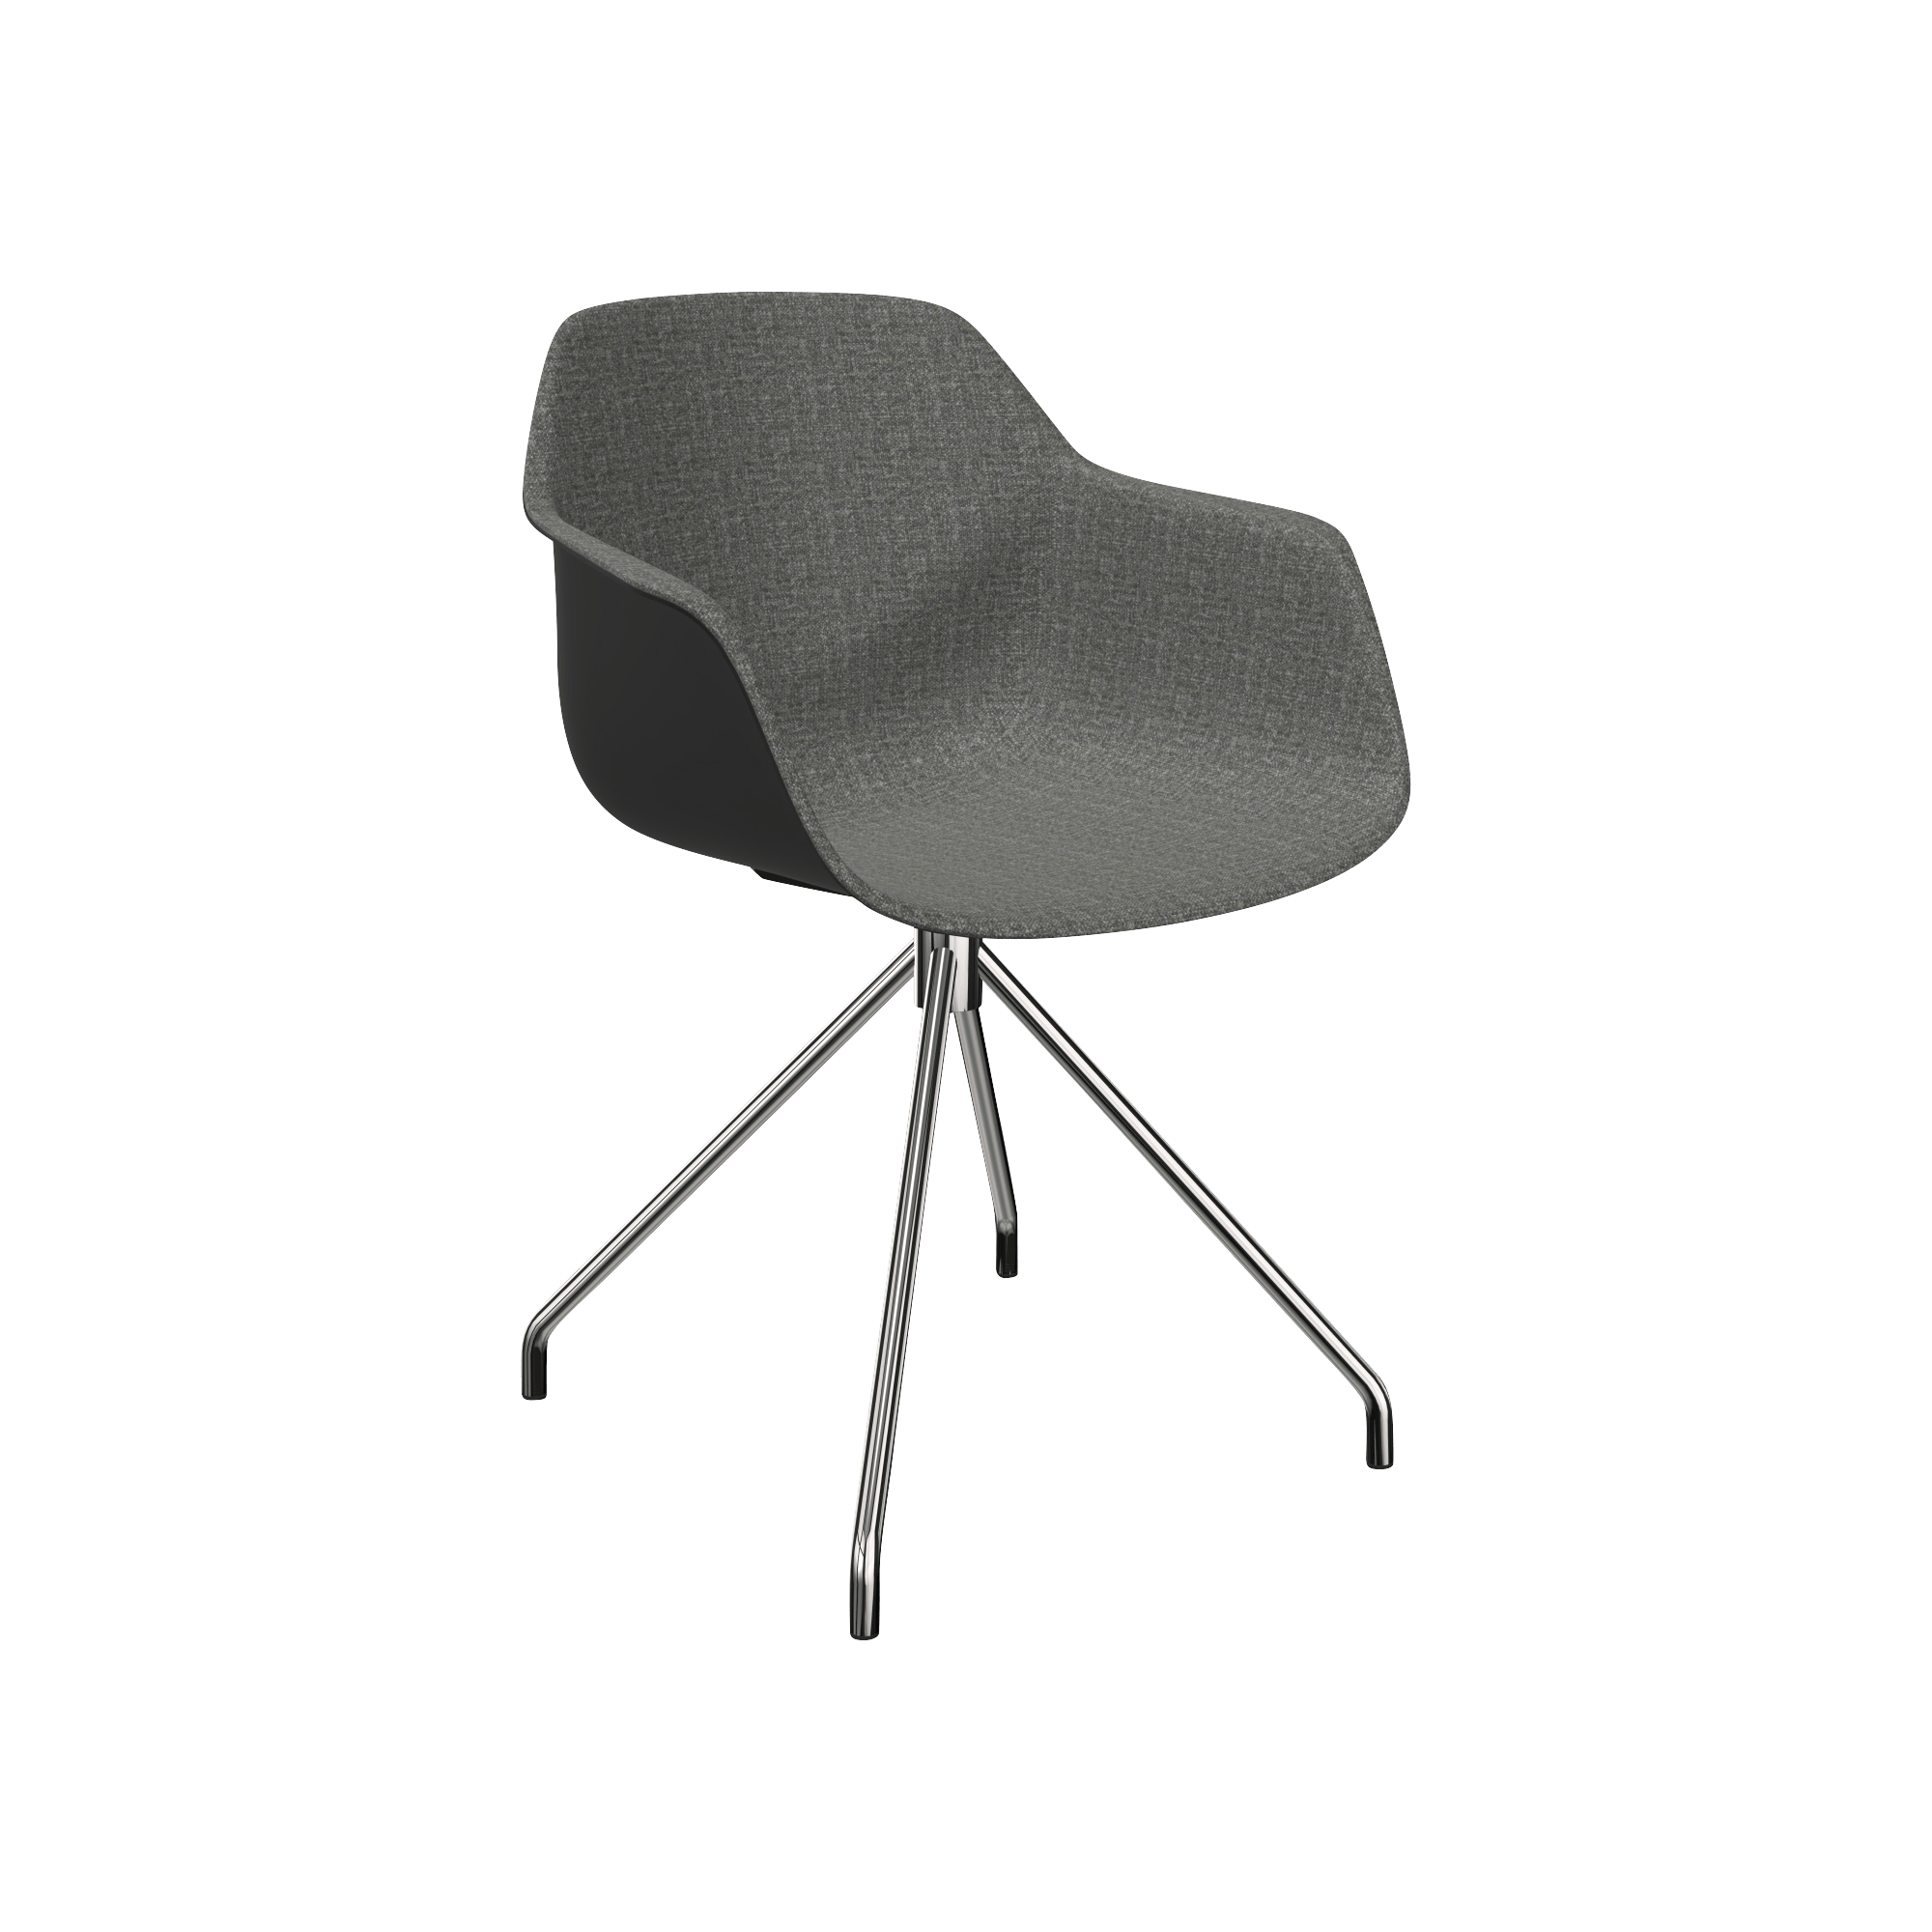 A chair with a grey fabric and metal legs.